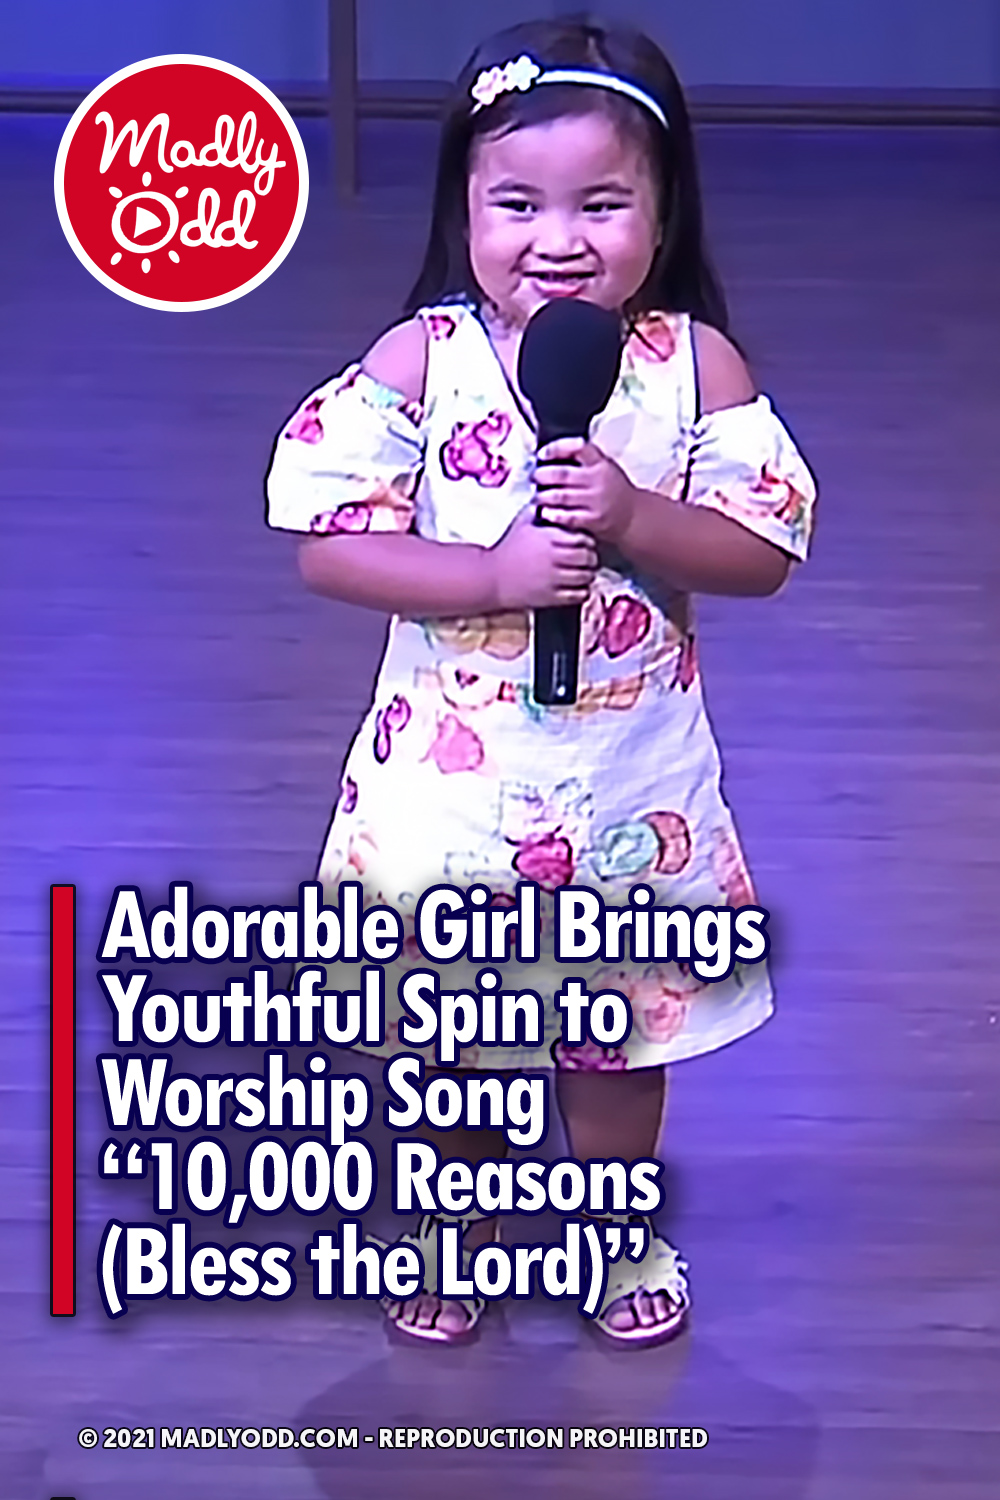 Adorable Girl Brings Youthful Spin to Worship Song “10,000 Reasons (Bless the Lord)”